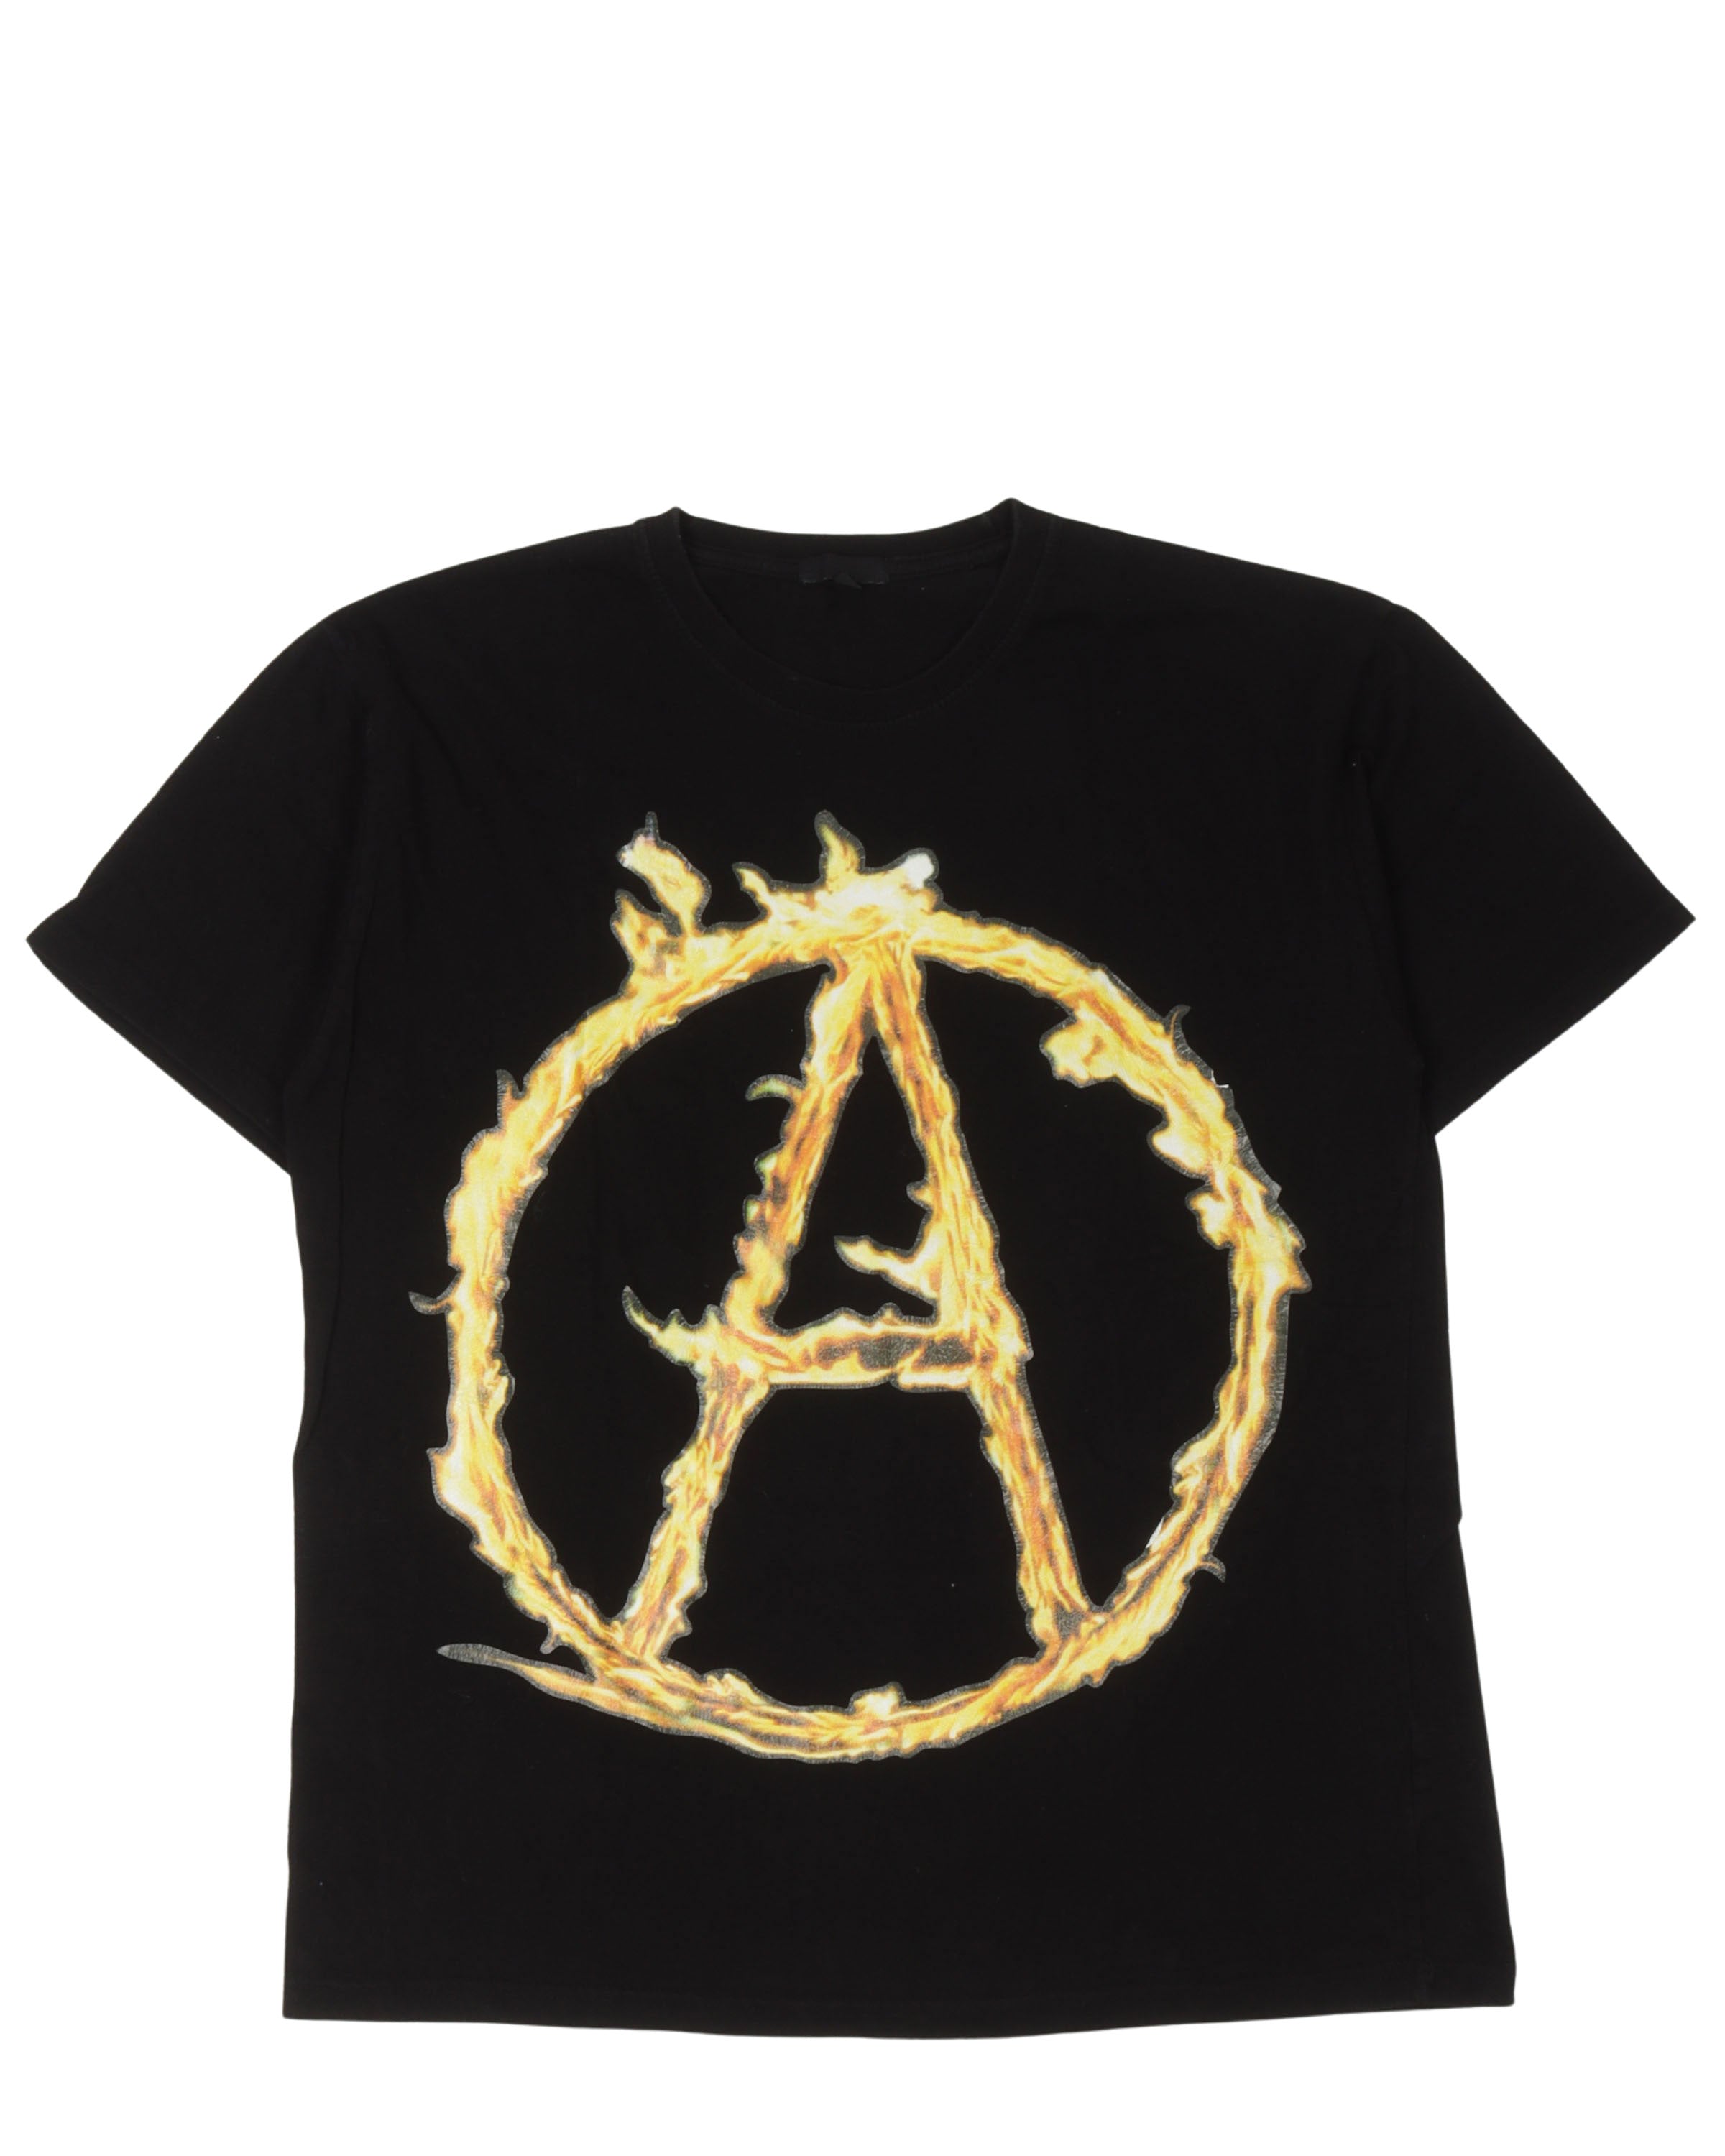 Anarchy Flame T-Shirt